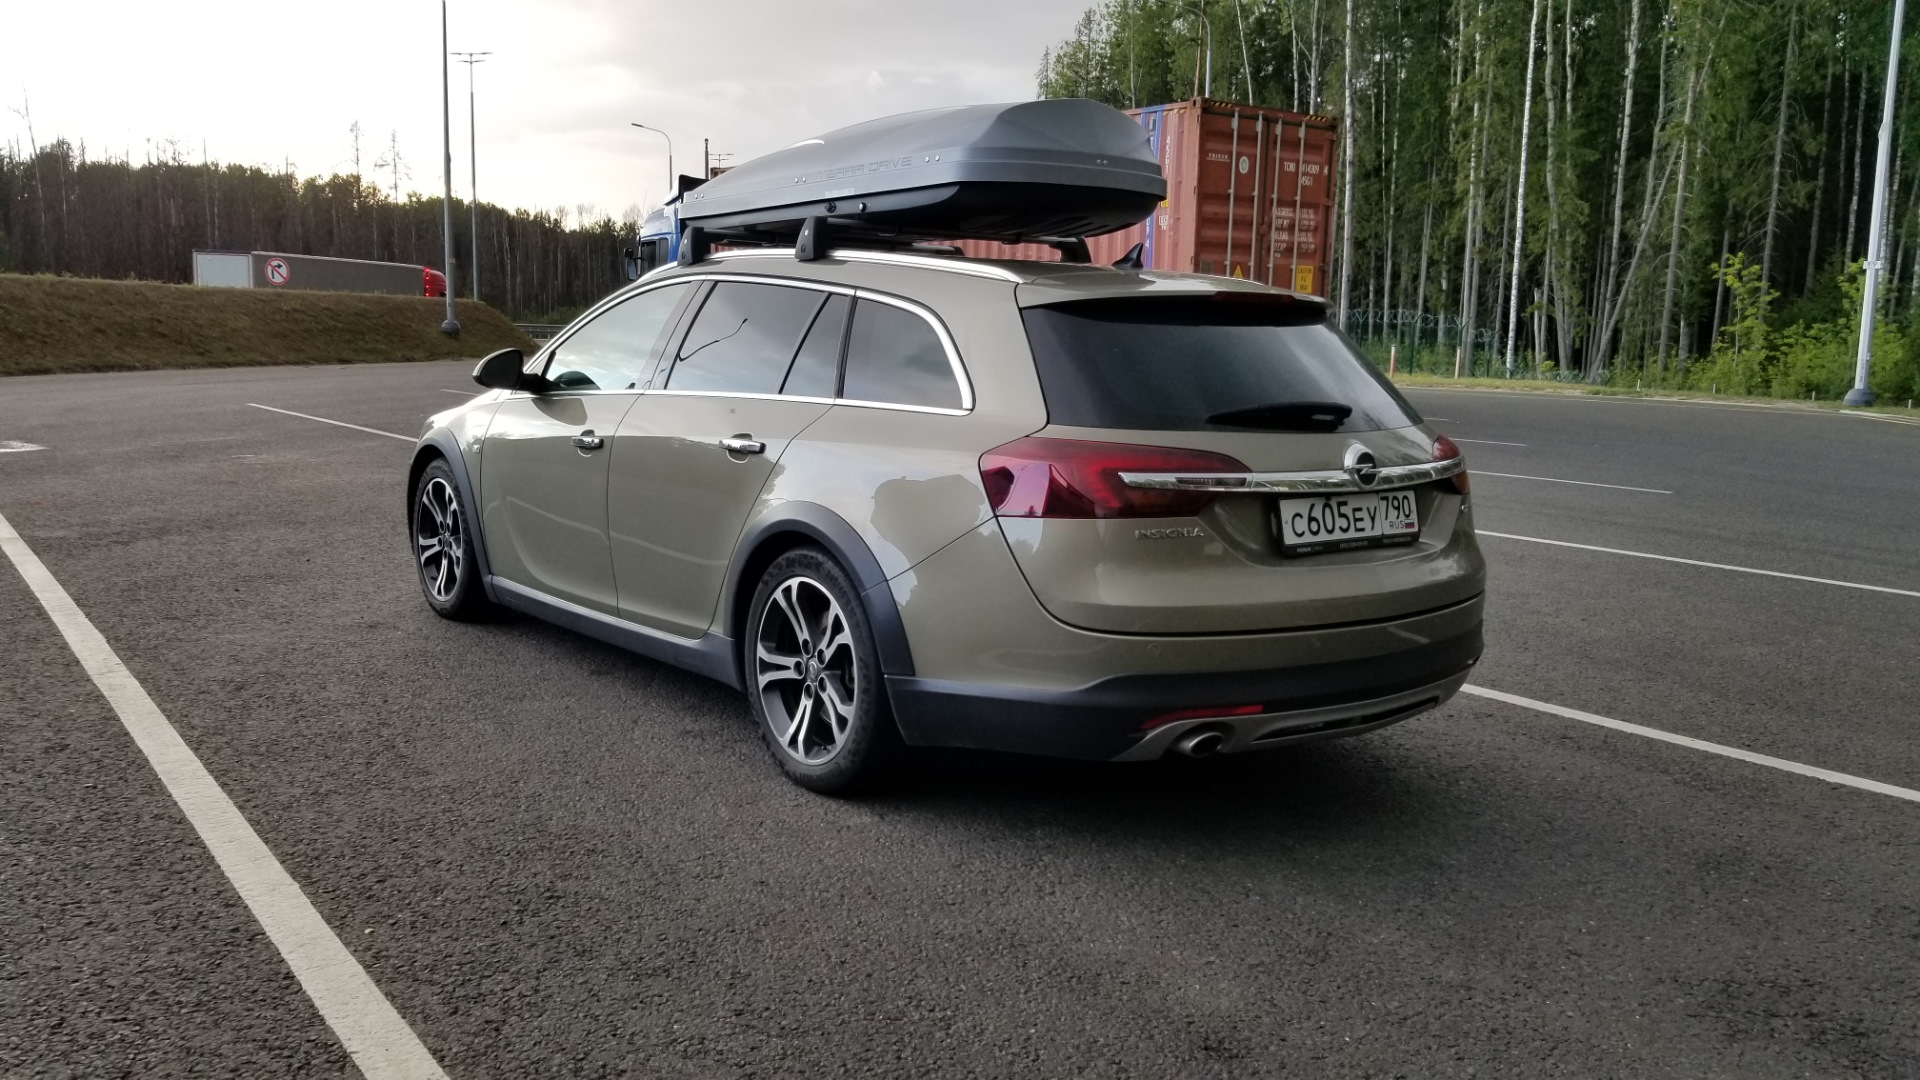 Country touring. Opel Insignia Country Tourer 2g. Opel Insignia Country Tourer 2014. Opel Insignia Country Tourer II. Insignia Country Tourer 2.